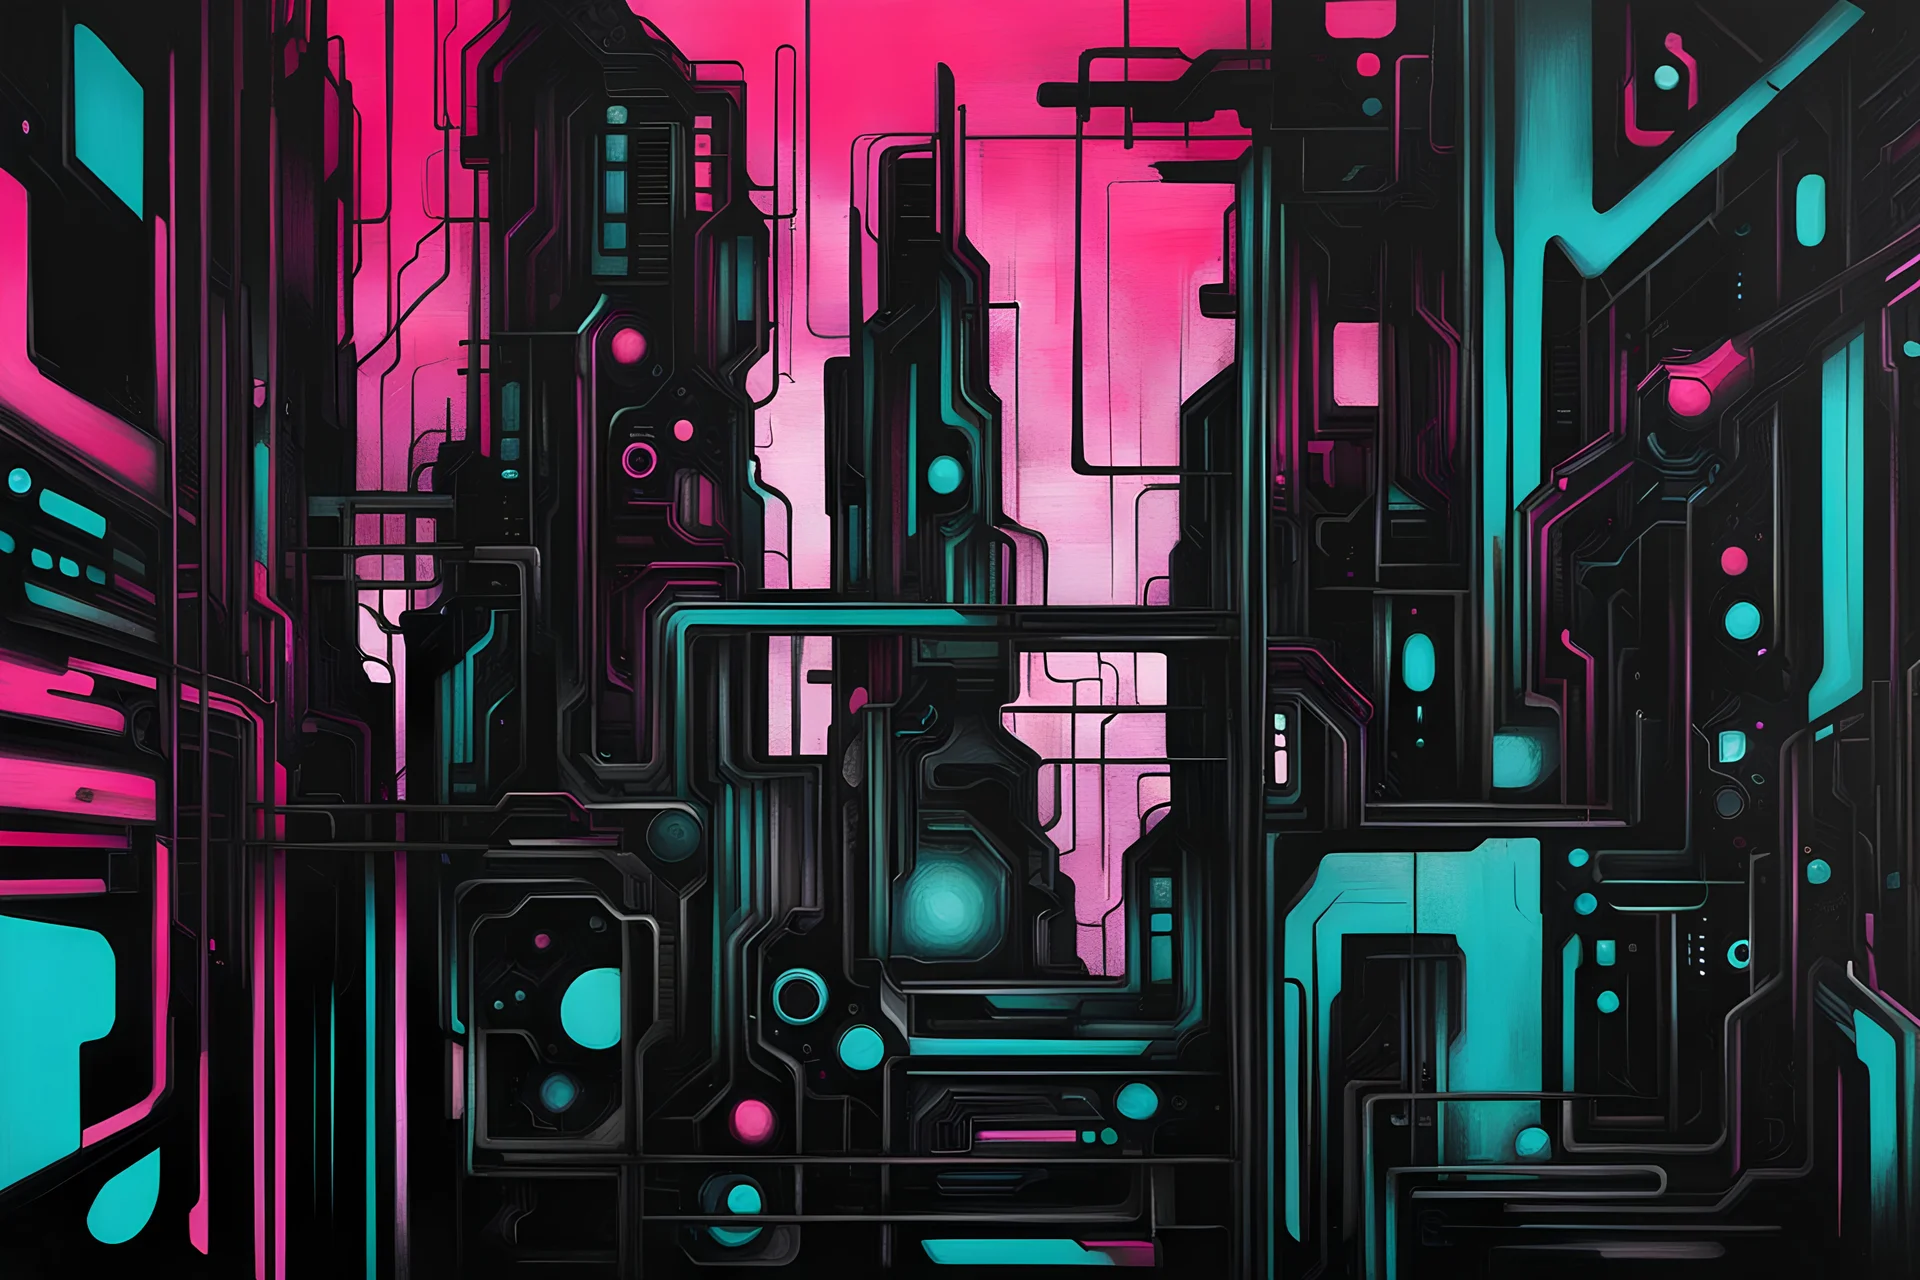 Black, turquoise, and pink abstract cyberpunk paintings